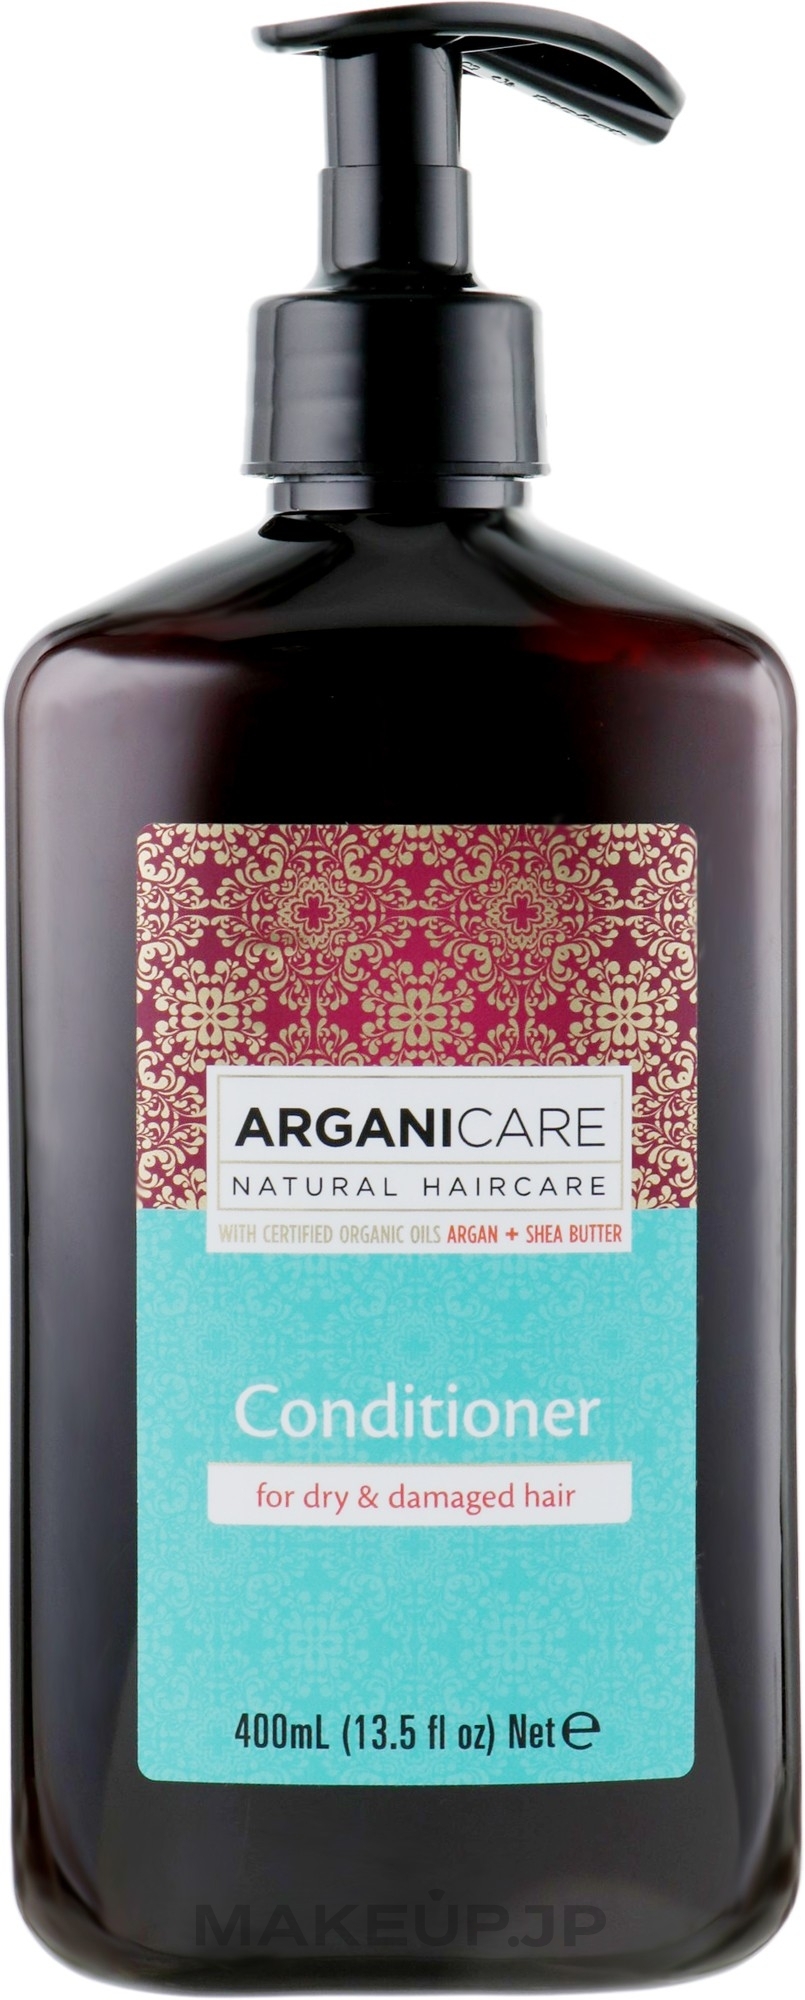 Dry & Damaged Hair Conditioner - Arganicare Shea Butter Conditioner For Dry And Damaged Hair  — photo 400 ml